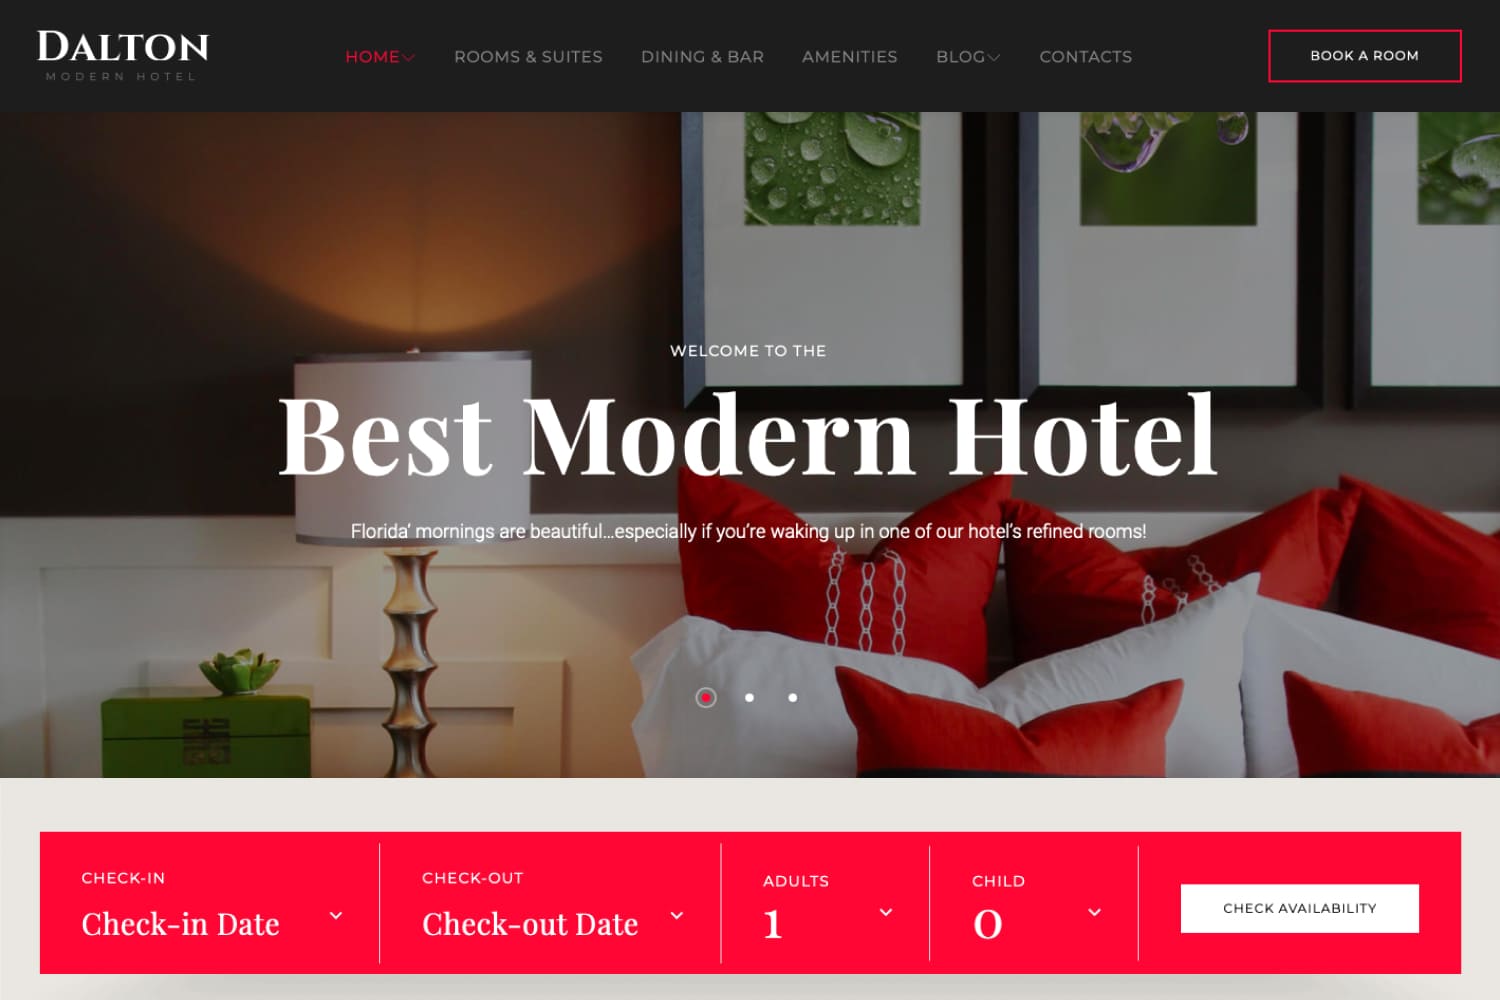 Home page of the hotel website with a photo of the bed in the room and red booking parameters.